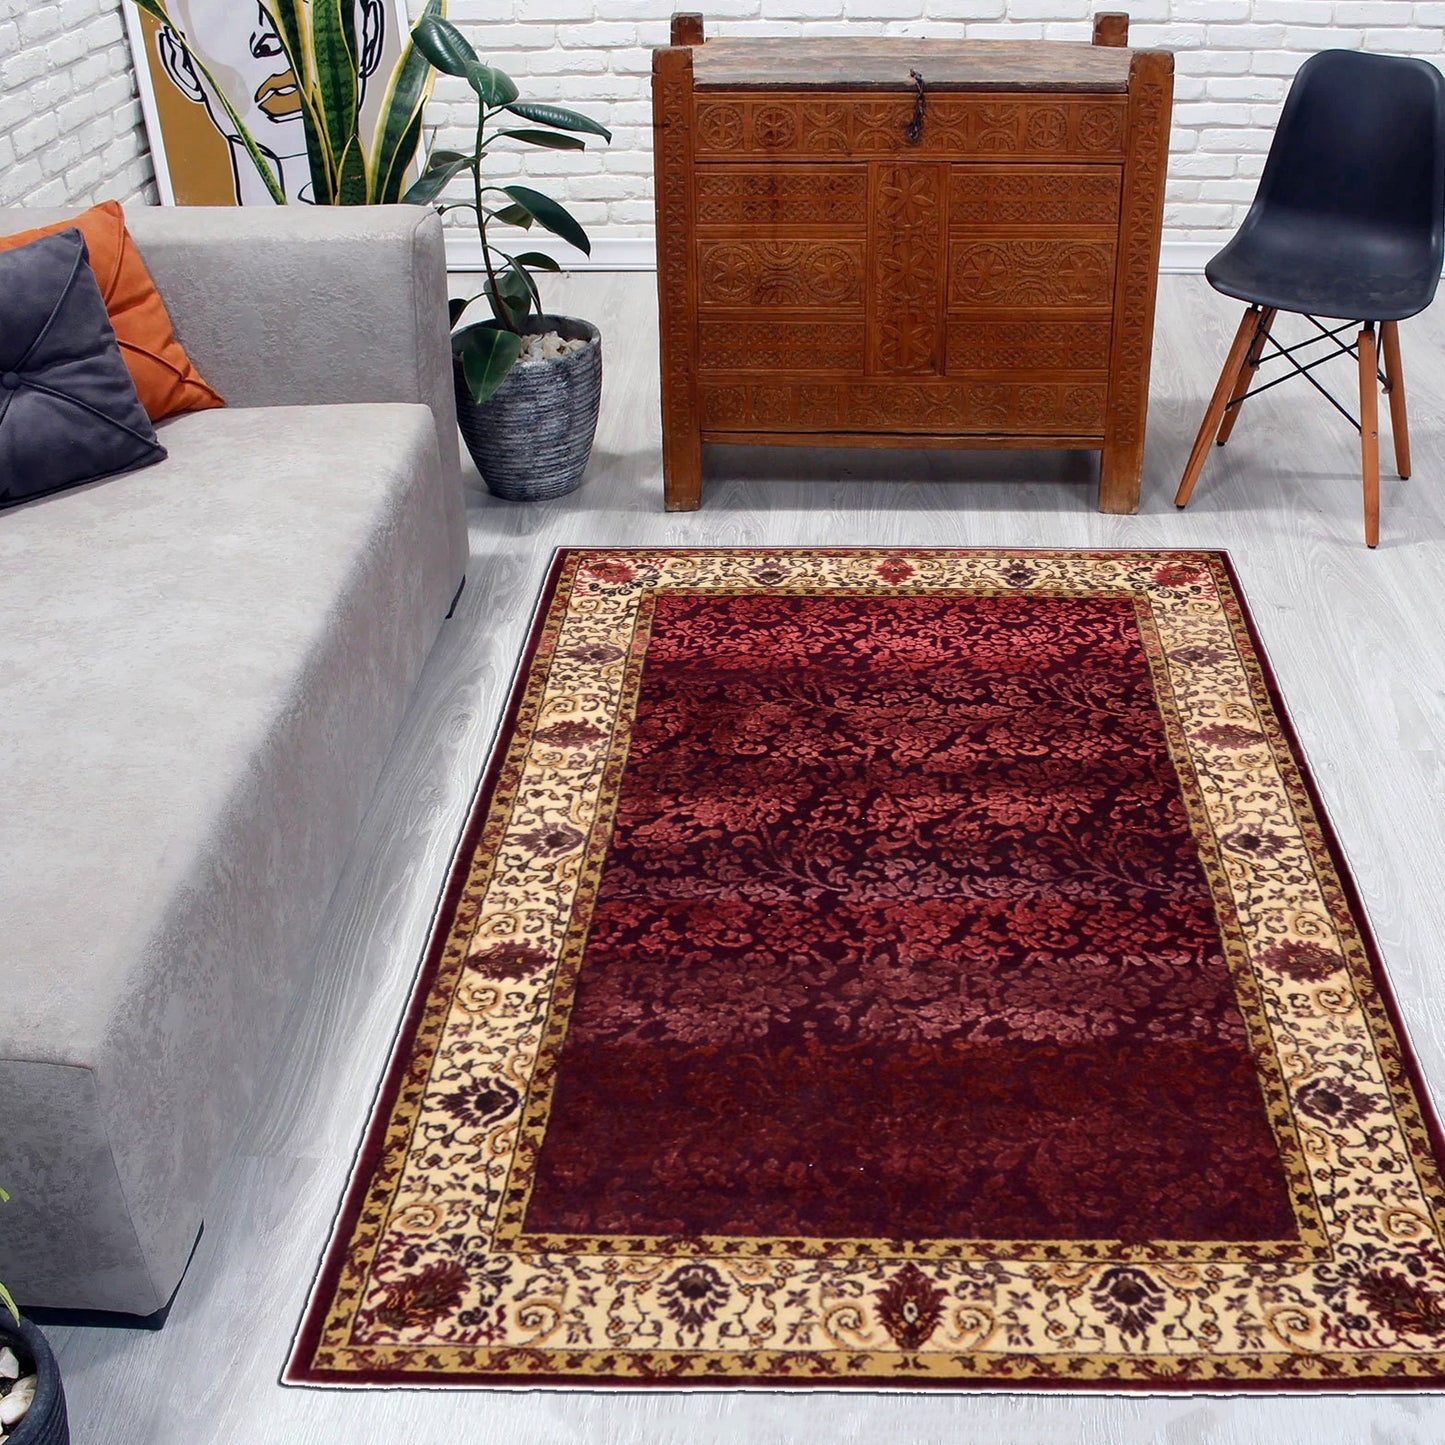 Get trendy with Red Ivory Viscose Wool Contemporary Handknotted Area Rug 4.0x5.9ft 123x174Cms - Contemporary Rugs available at Jaipur Oriental Rugs. Grab yours for $965.00 today!